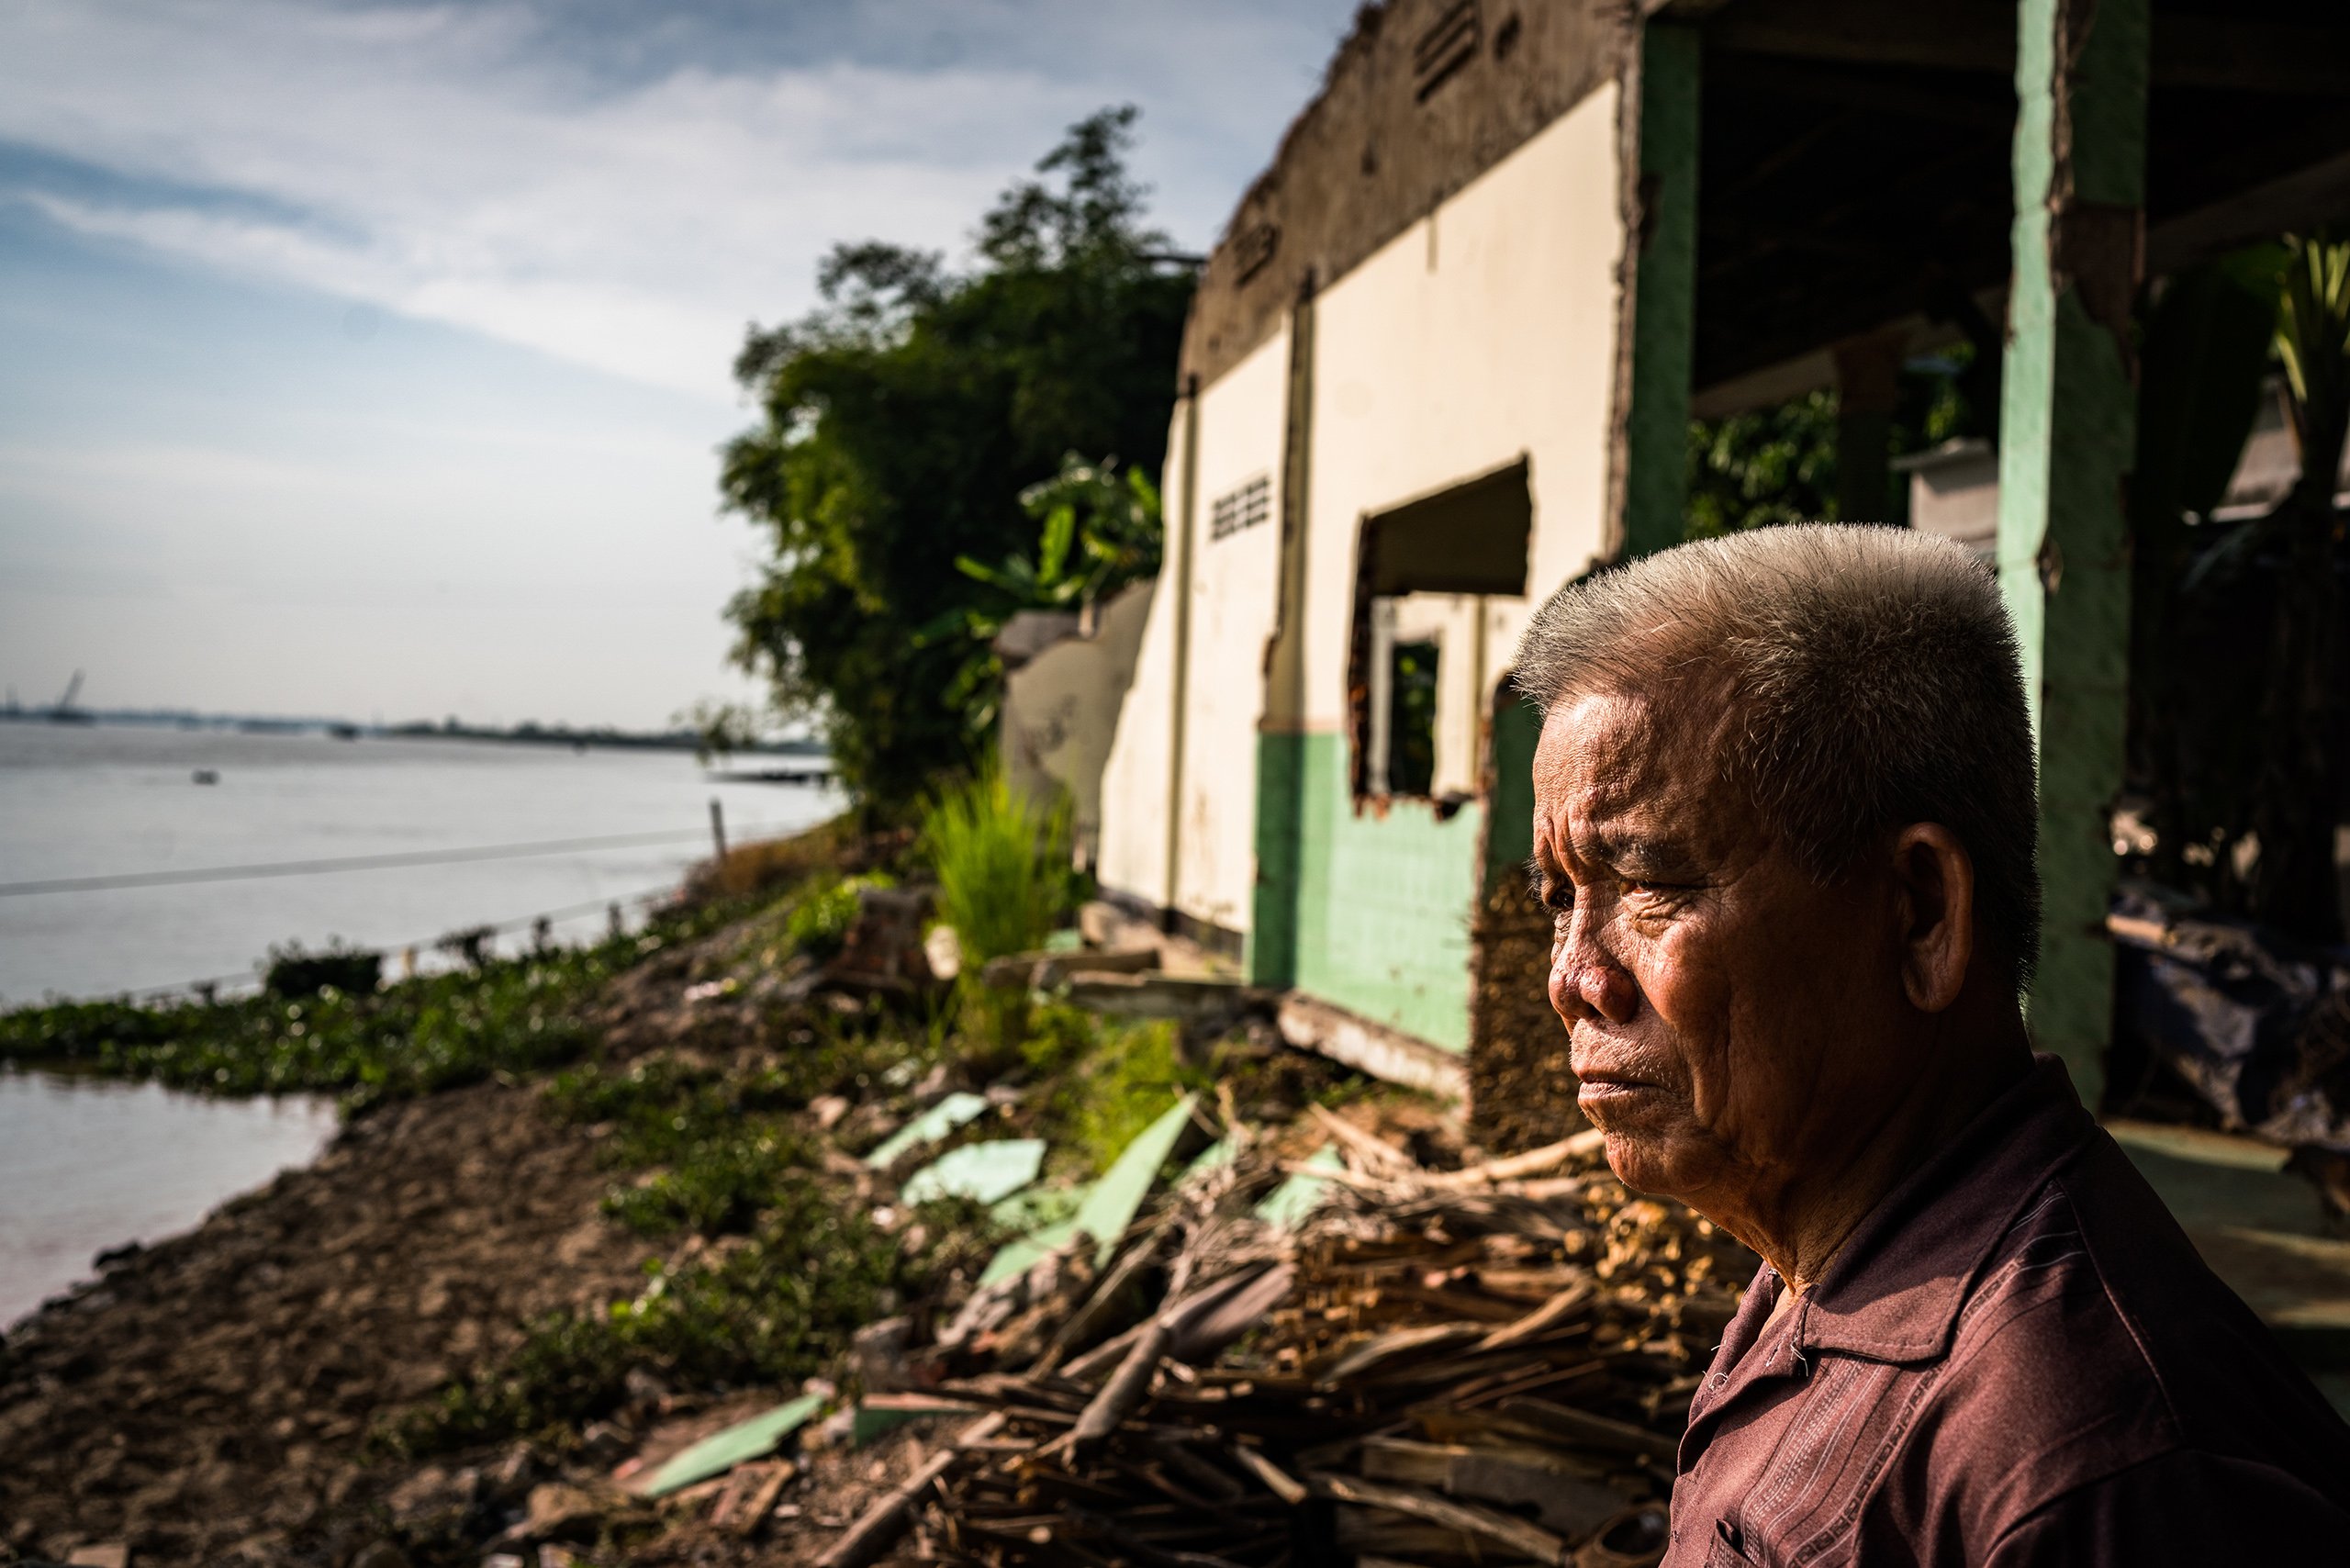 <p>Since their neighbours’ house collapsed due to erosion, Nguyen Van Thuong (pictured) and his wife Lam Thi Le have been afraid they too will soon lose their home a few metres from the Tien river in southwest Vietnam (Image: <a href="http://www.quinnmattingly.com/">Quinn Ryan Mattingly</a>)</p>